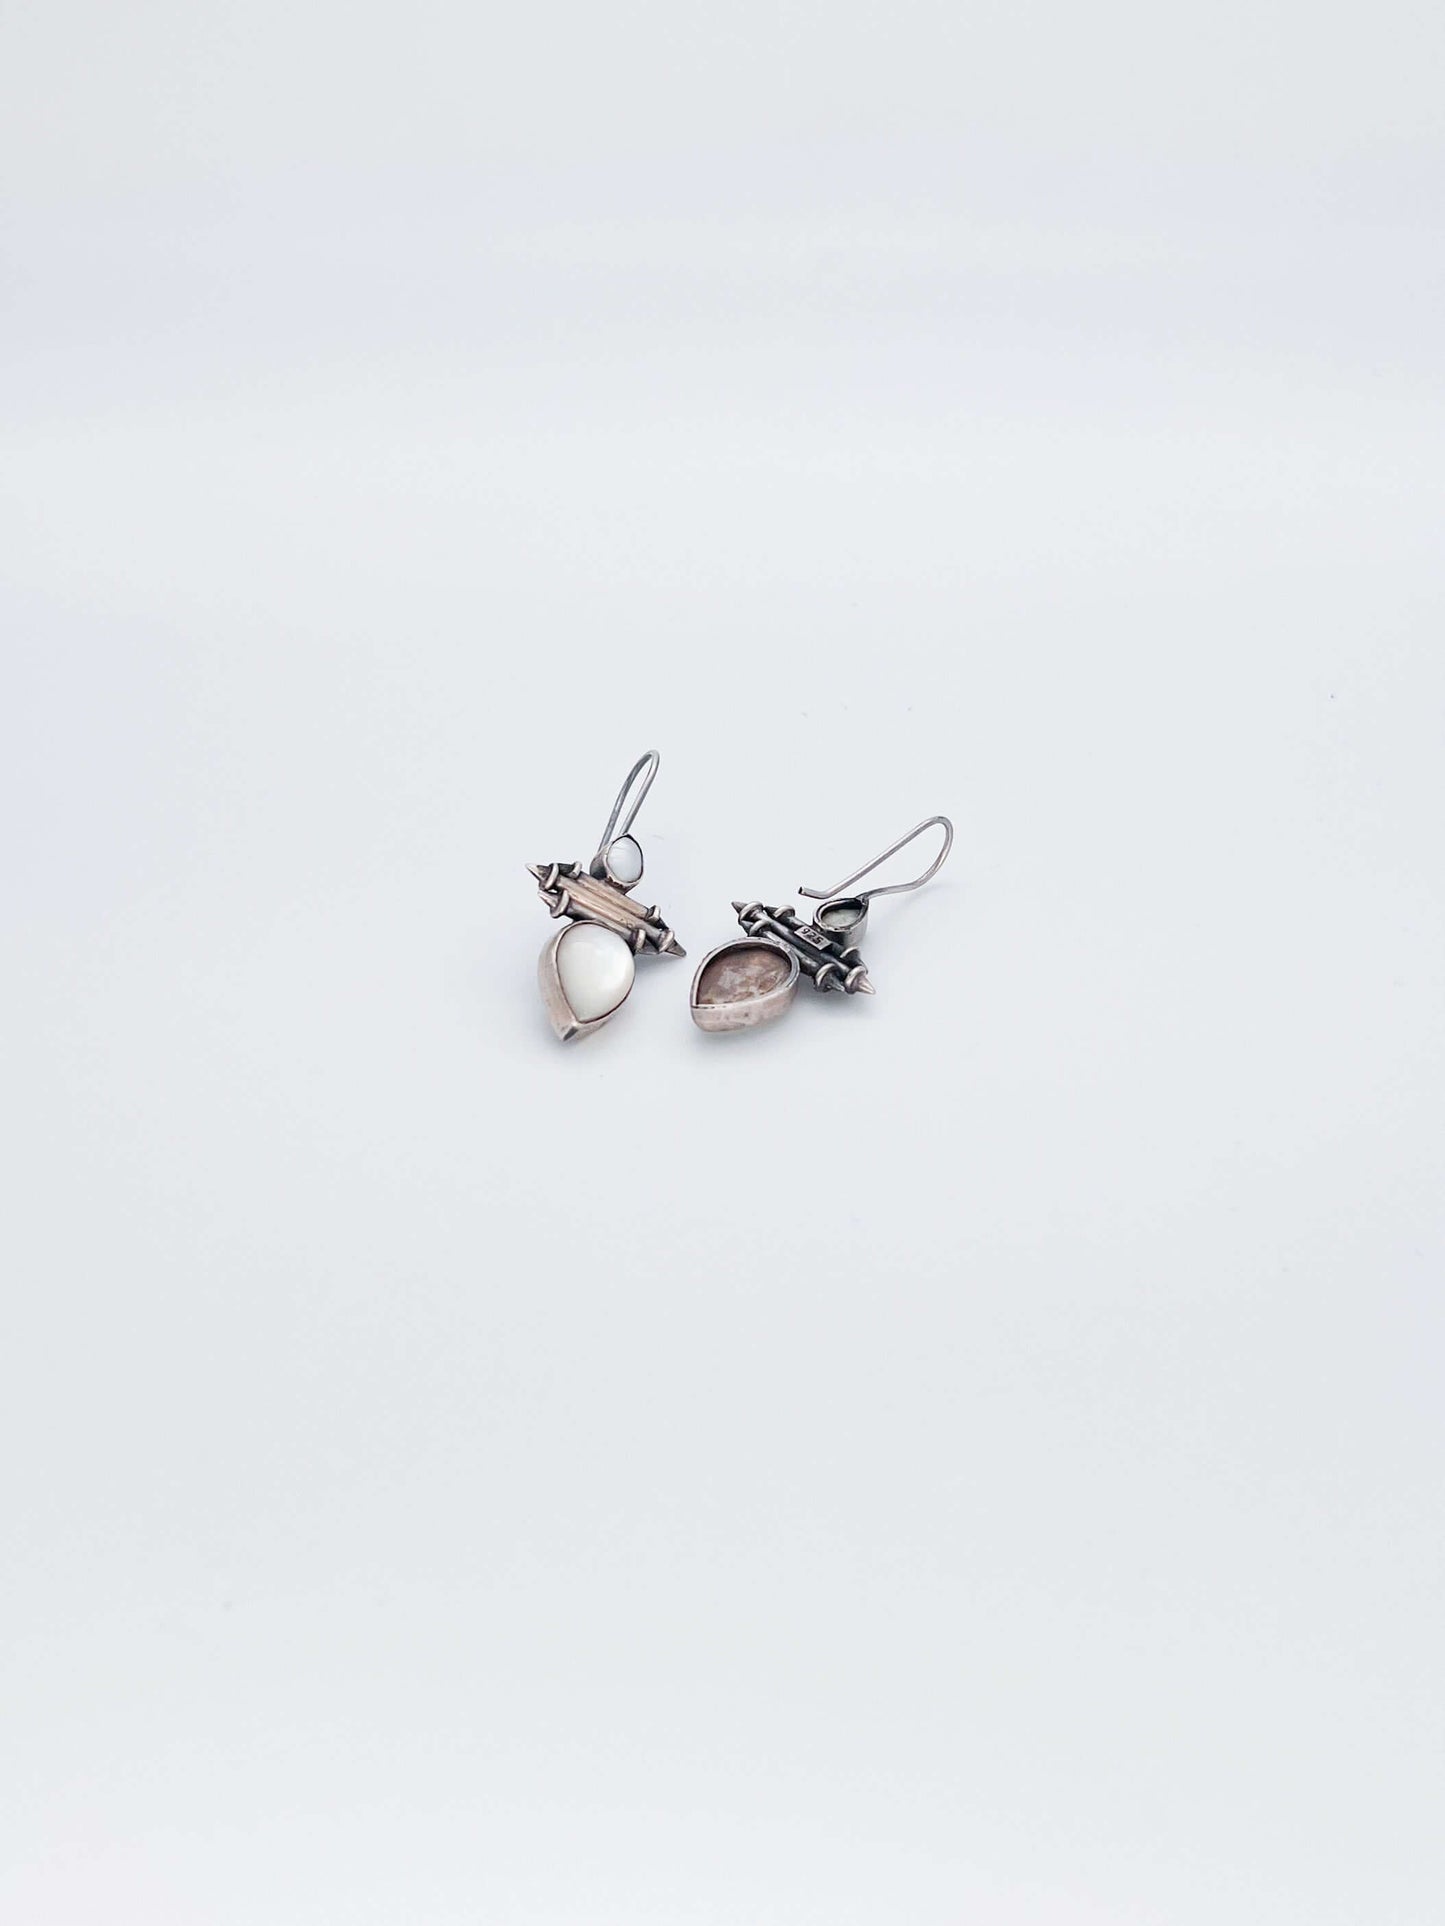 Adya silver earrings with pearl and opalite drop